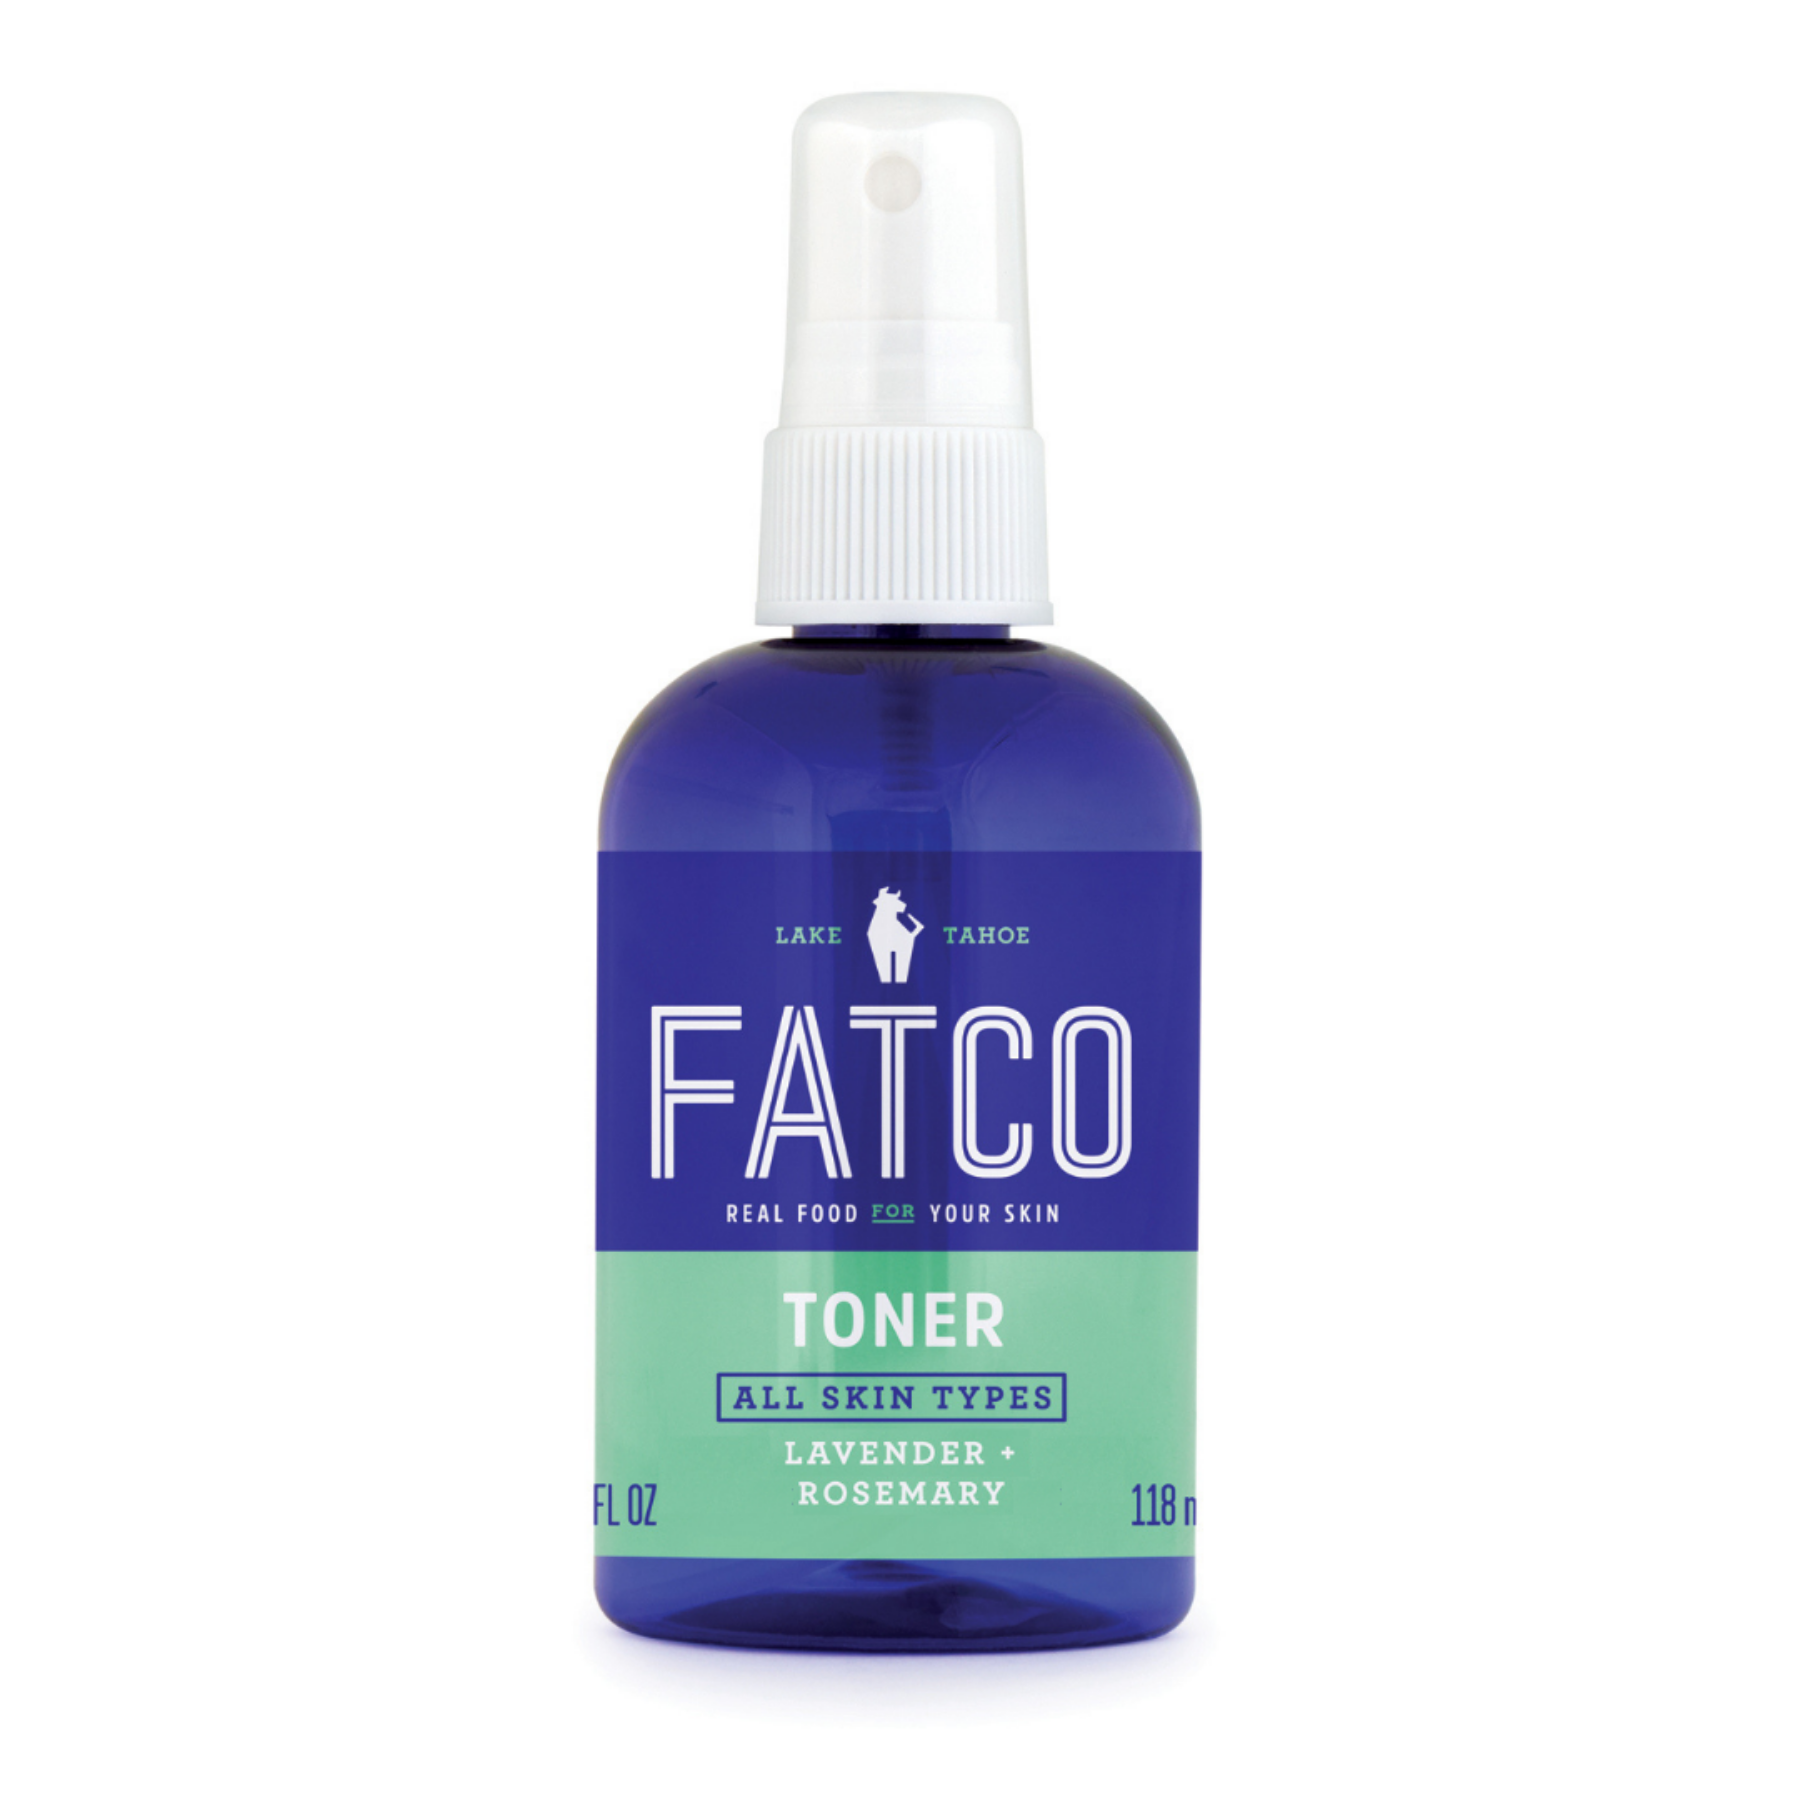 Toner 4oz by FATCO Skincare Products